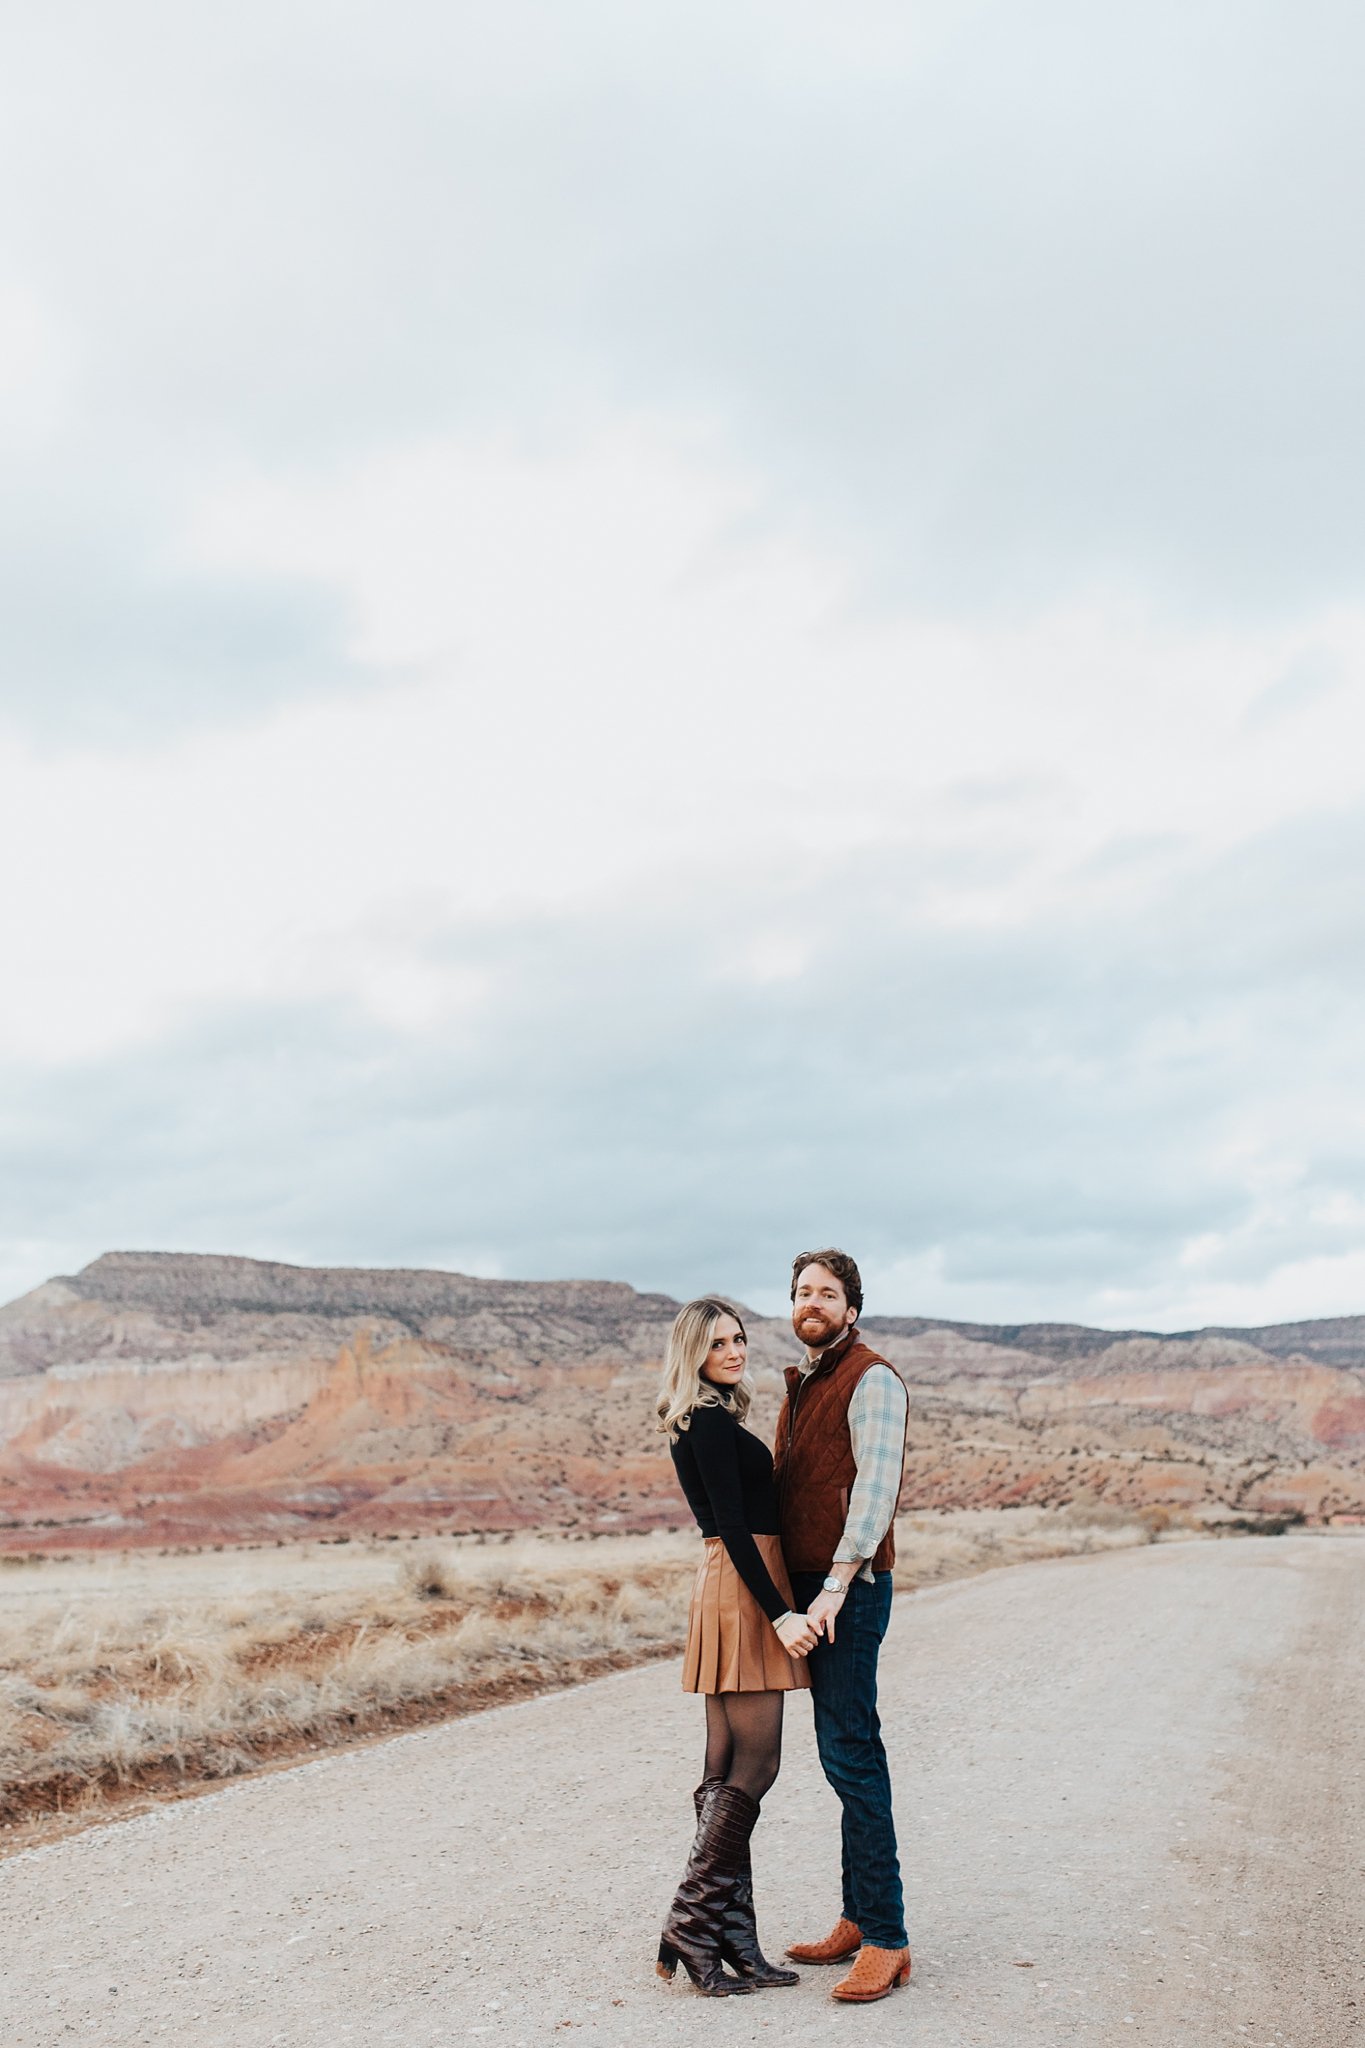 Alicia+lucia+photography+-+albuquerque+wedding+photographer+-+santa+fe+wedding+photography+-+new+mexico+wedding+photographer+-+new+mexico+wedding+-+southwest+engagement+-+ghost+ranch+engagement+-+ghost+ranch+wedding_0100.jpg